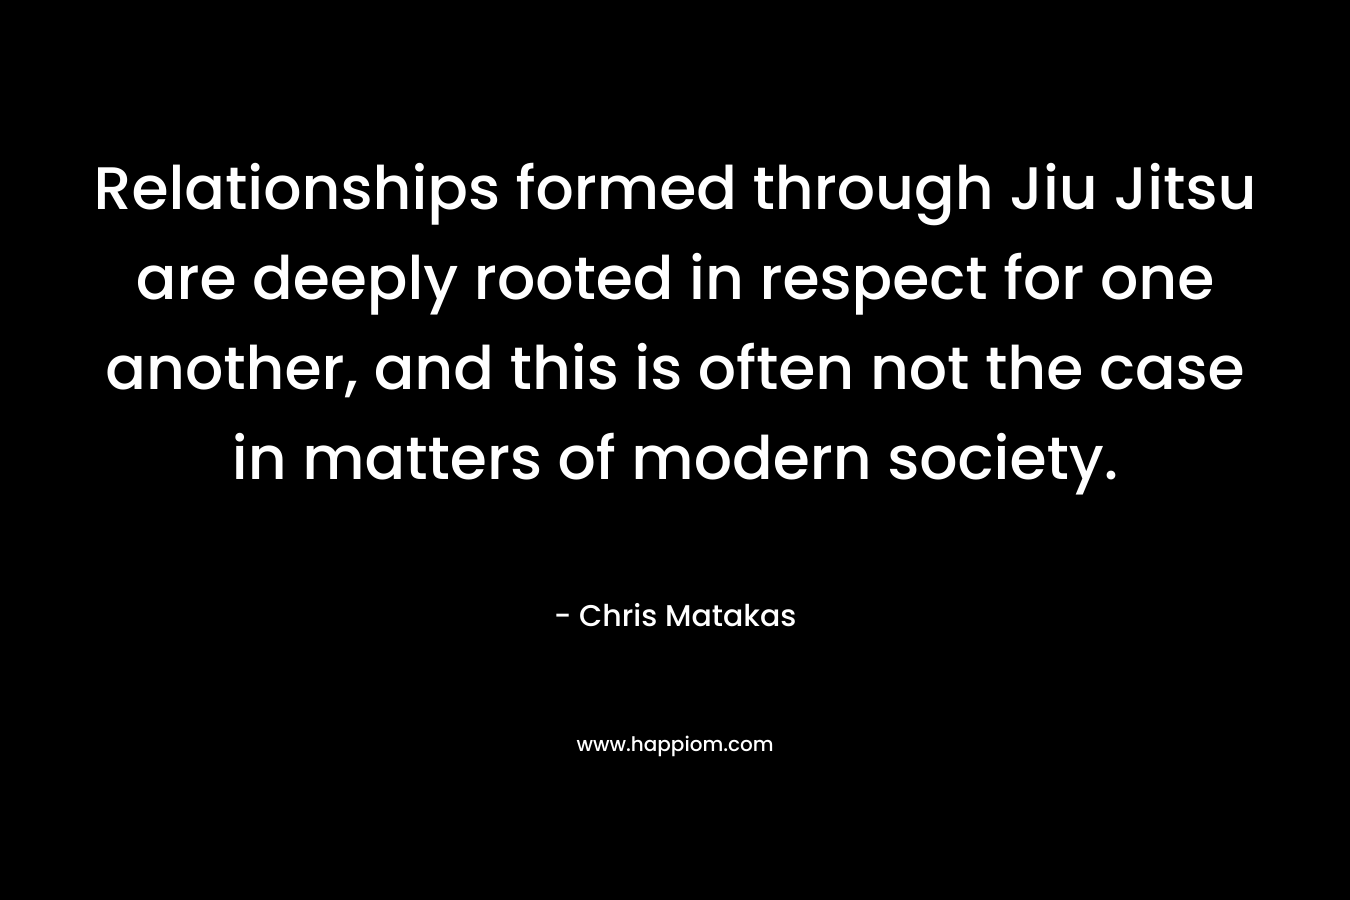 Relationships formed through Jiu Jitsu are deeply rooted in respect for one another, and this is often not the case in matters of modern society. – Chris Matakas